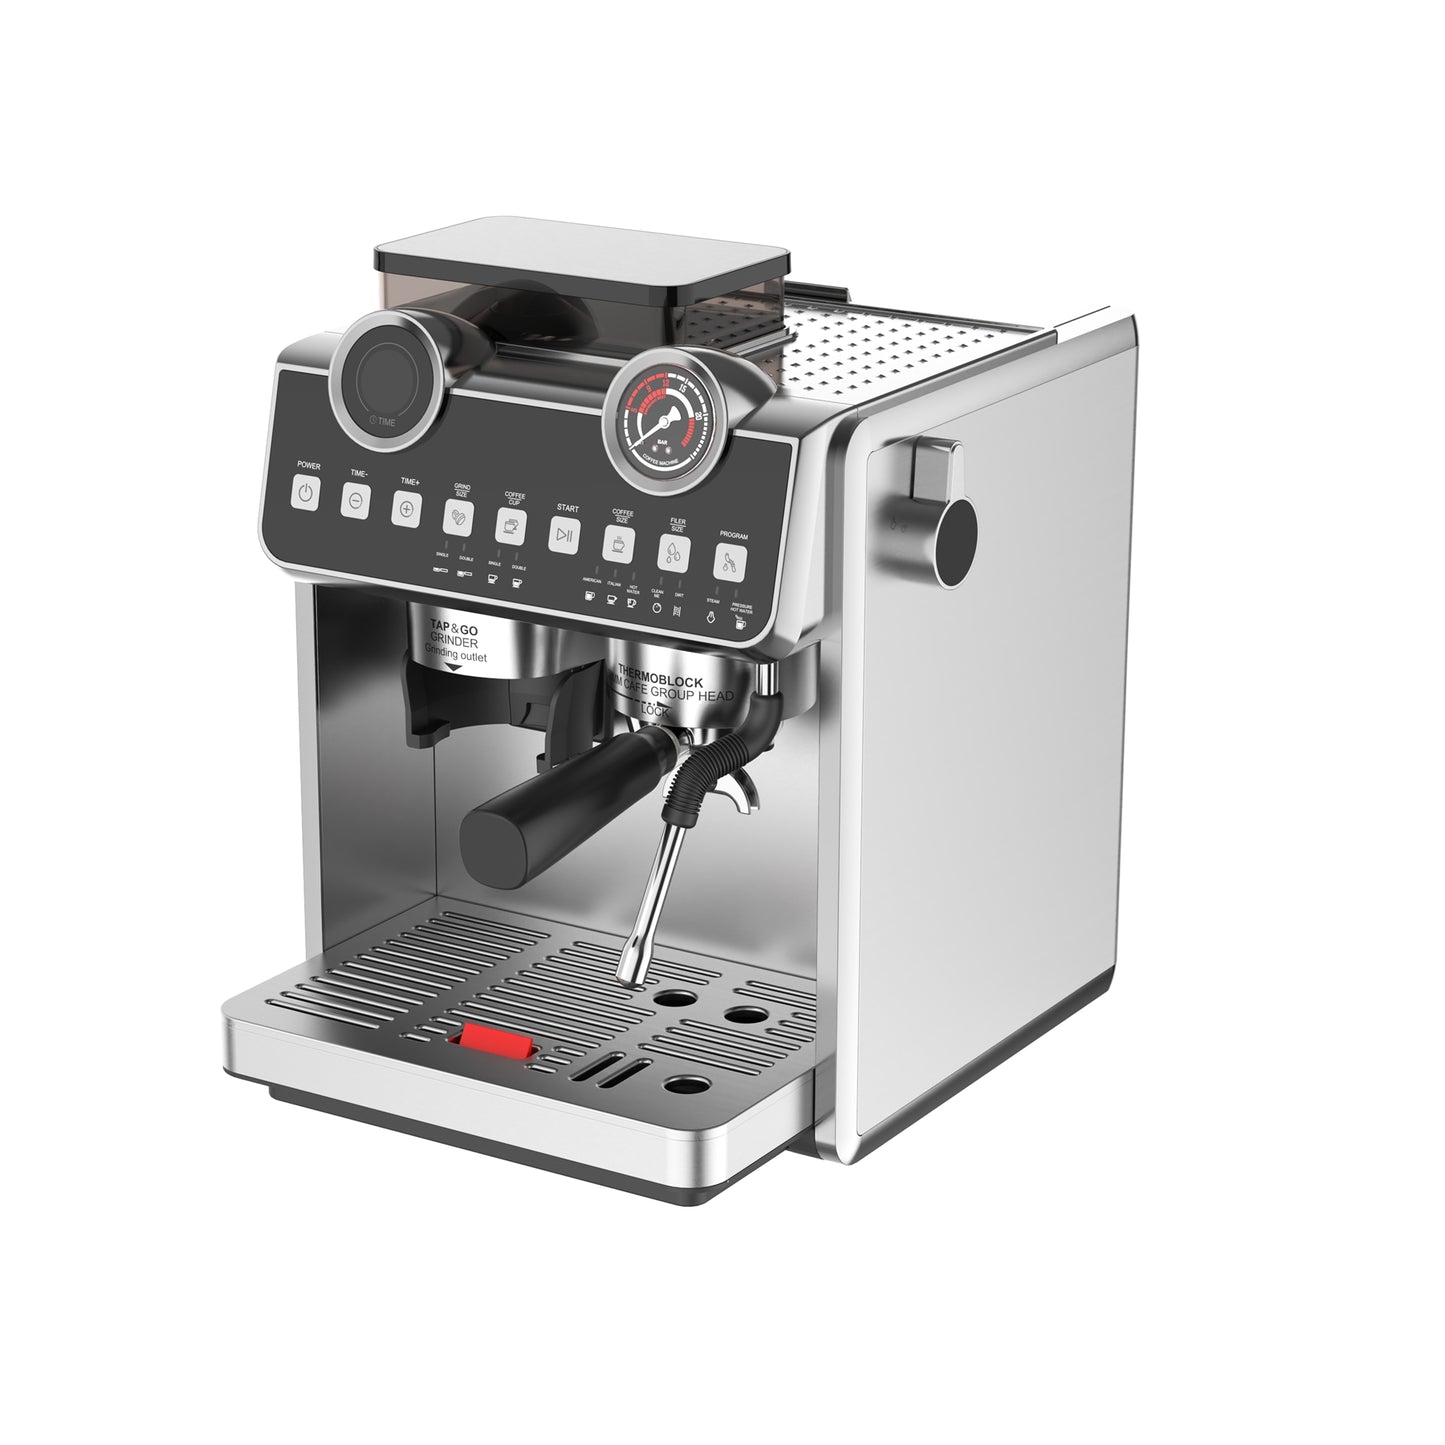 CHCOFF653 ESPRESSO Coffee Machine Double Boiler And Double Pump 20Bar Extraction With Bean Grinder